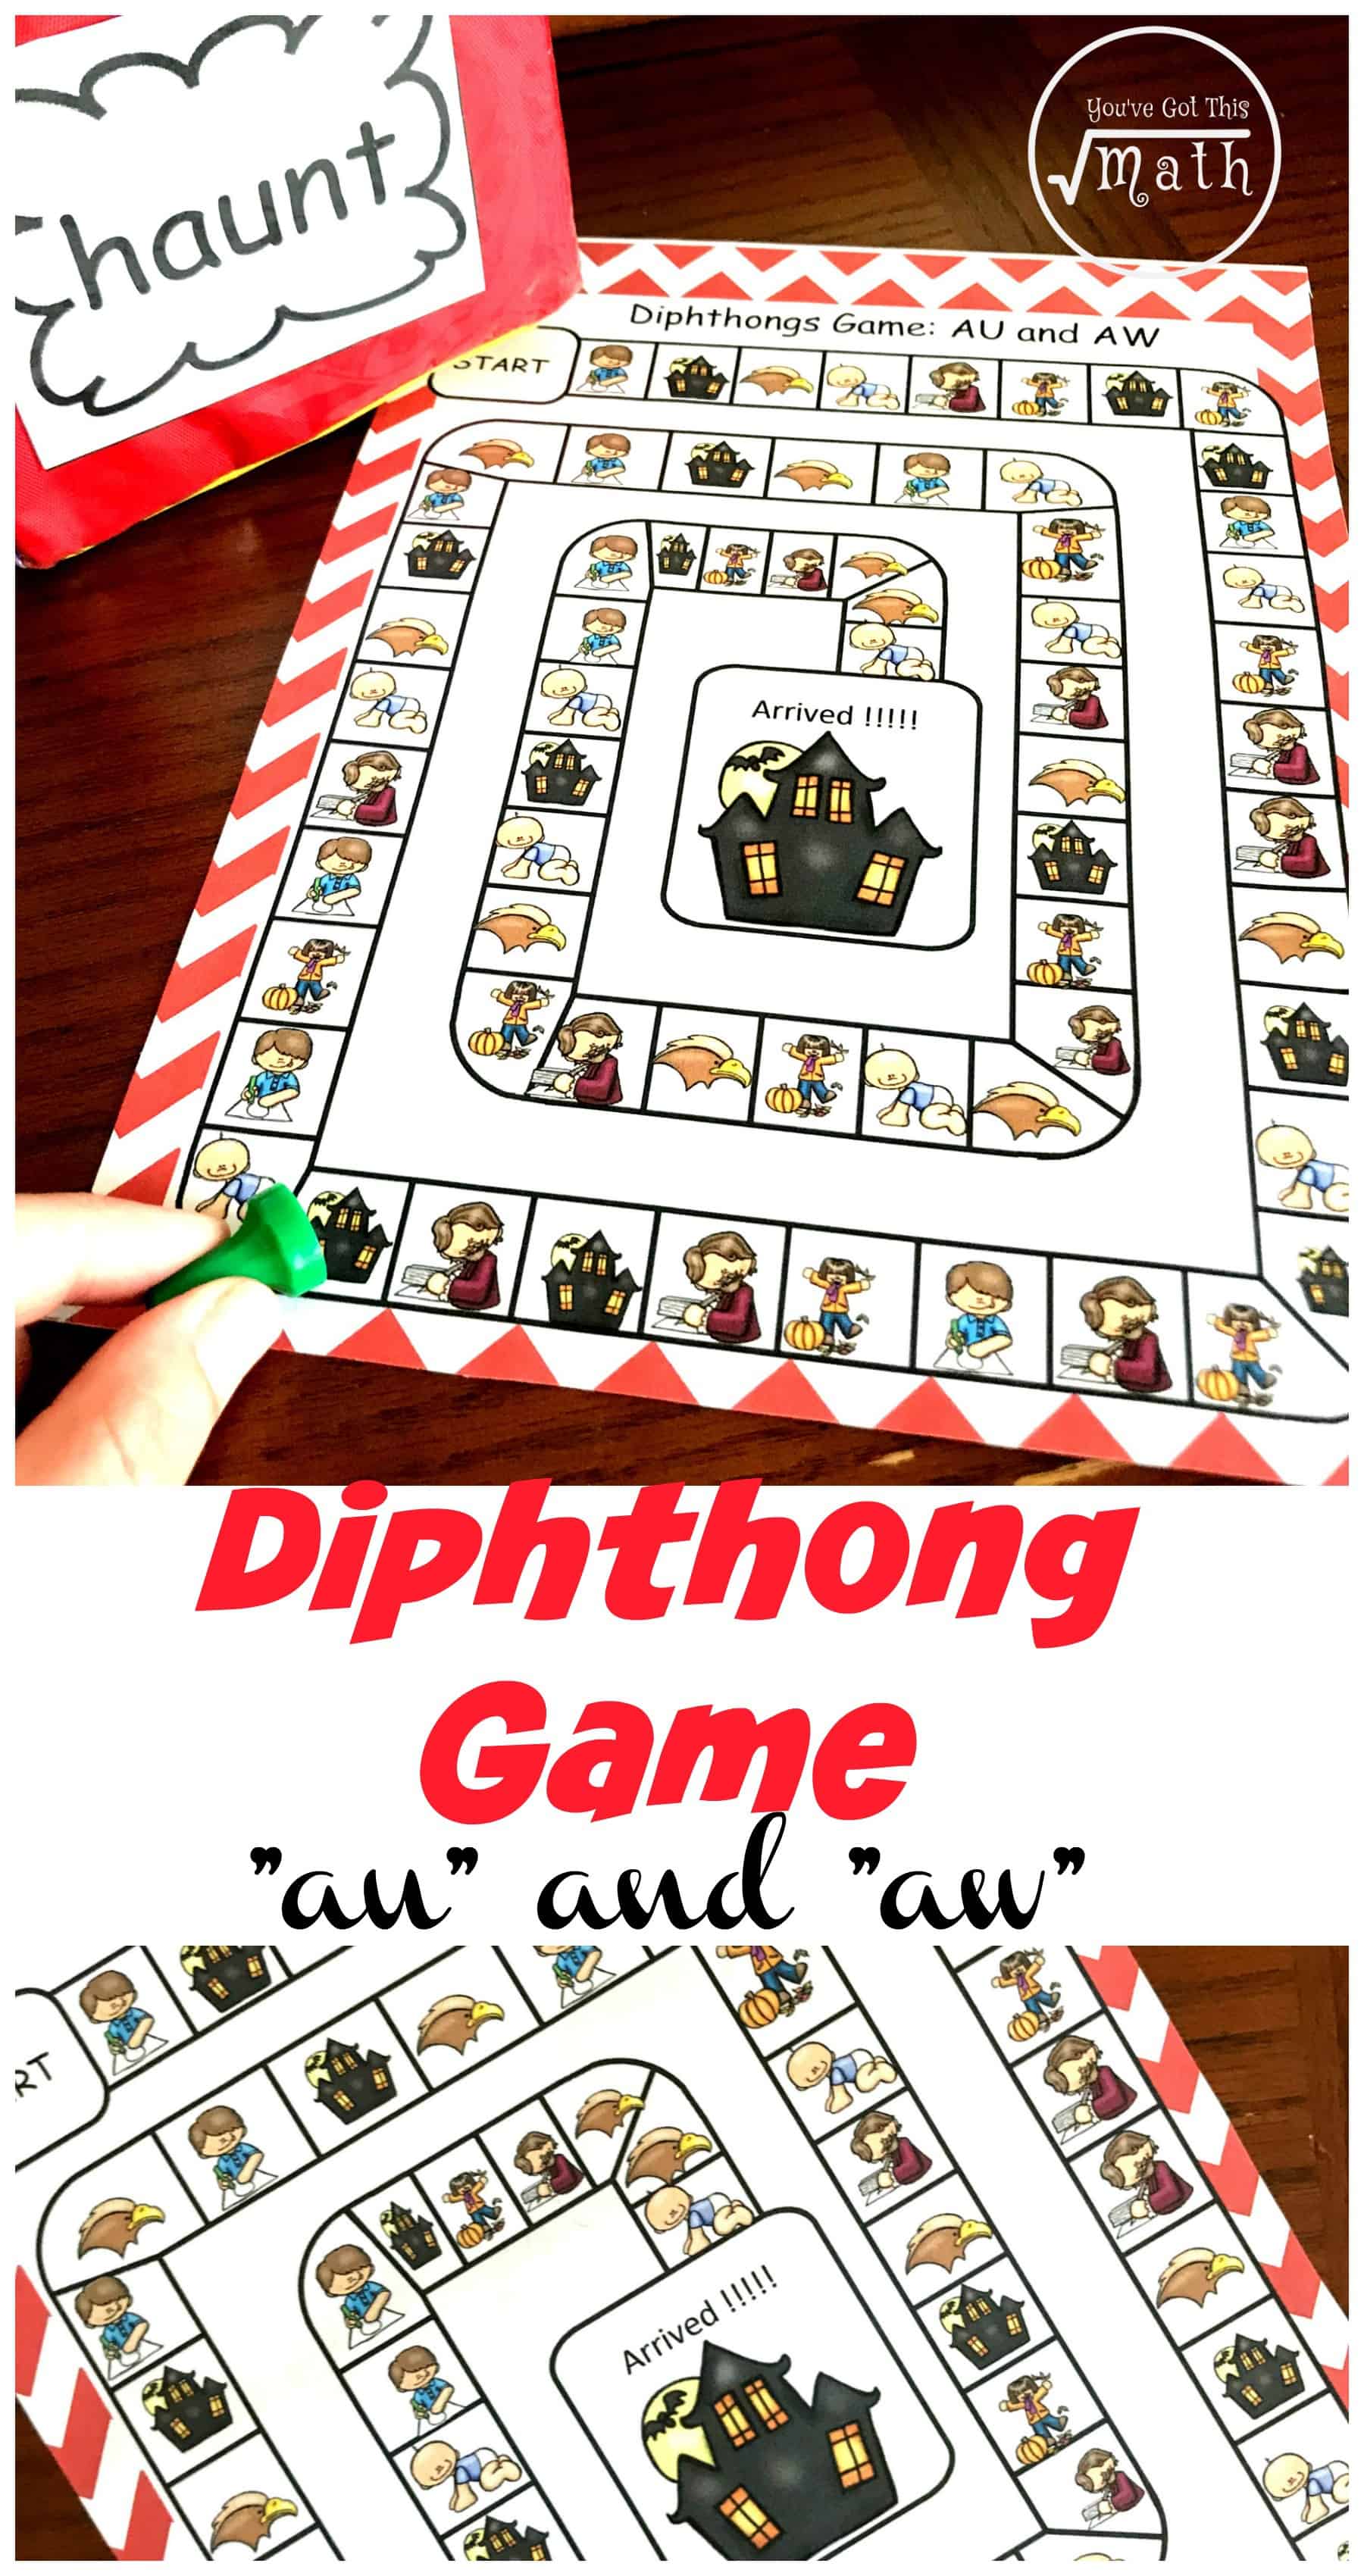 Want a fun way to work on diphthongs? Check out this low prep, diphthong game that encourages children to read diphthong words and find matching pictures.